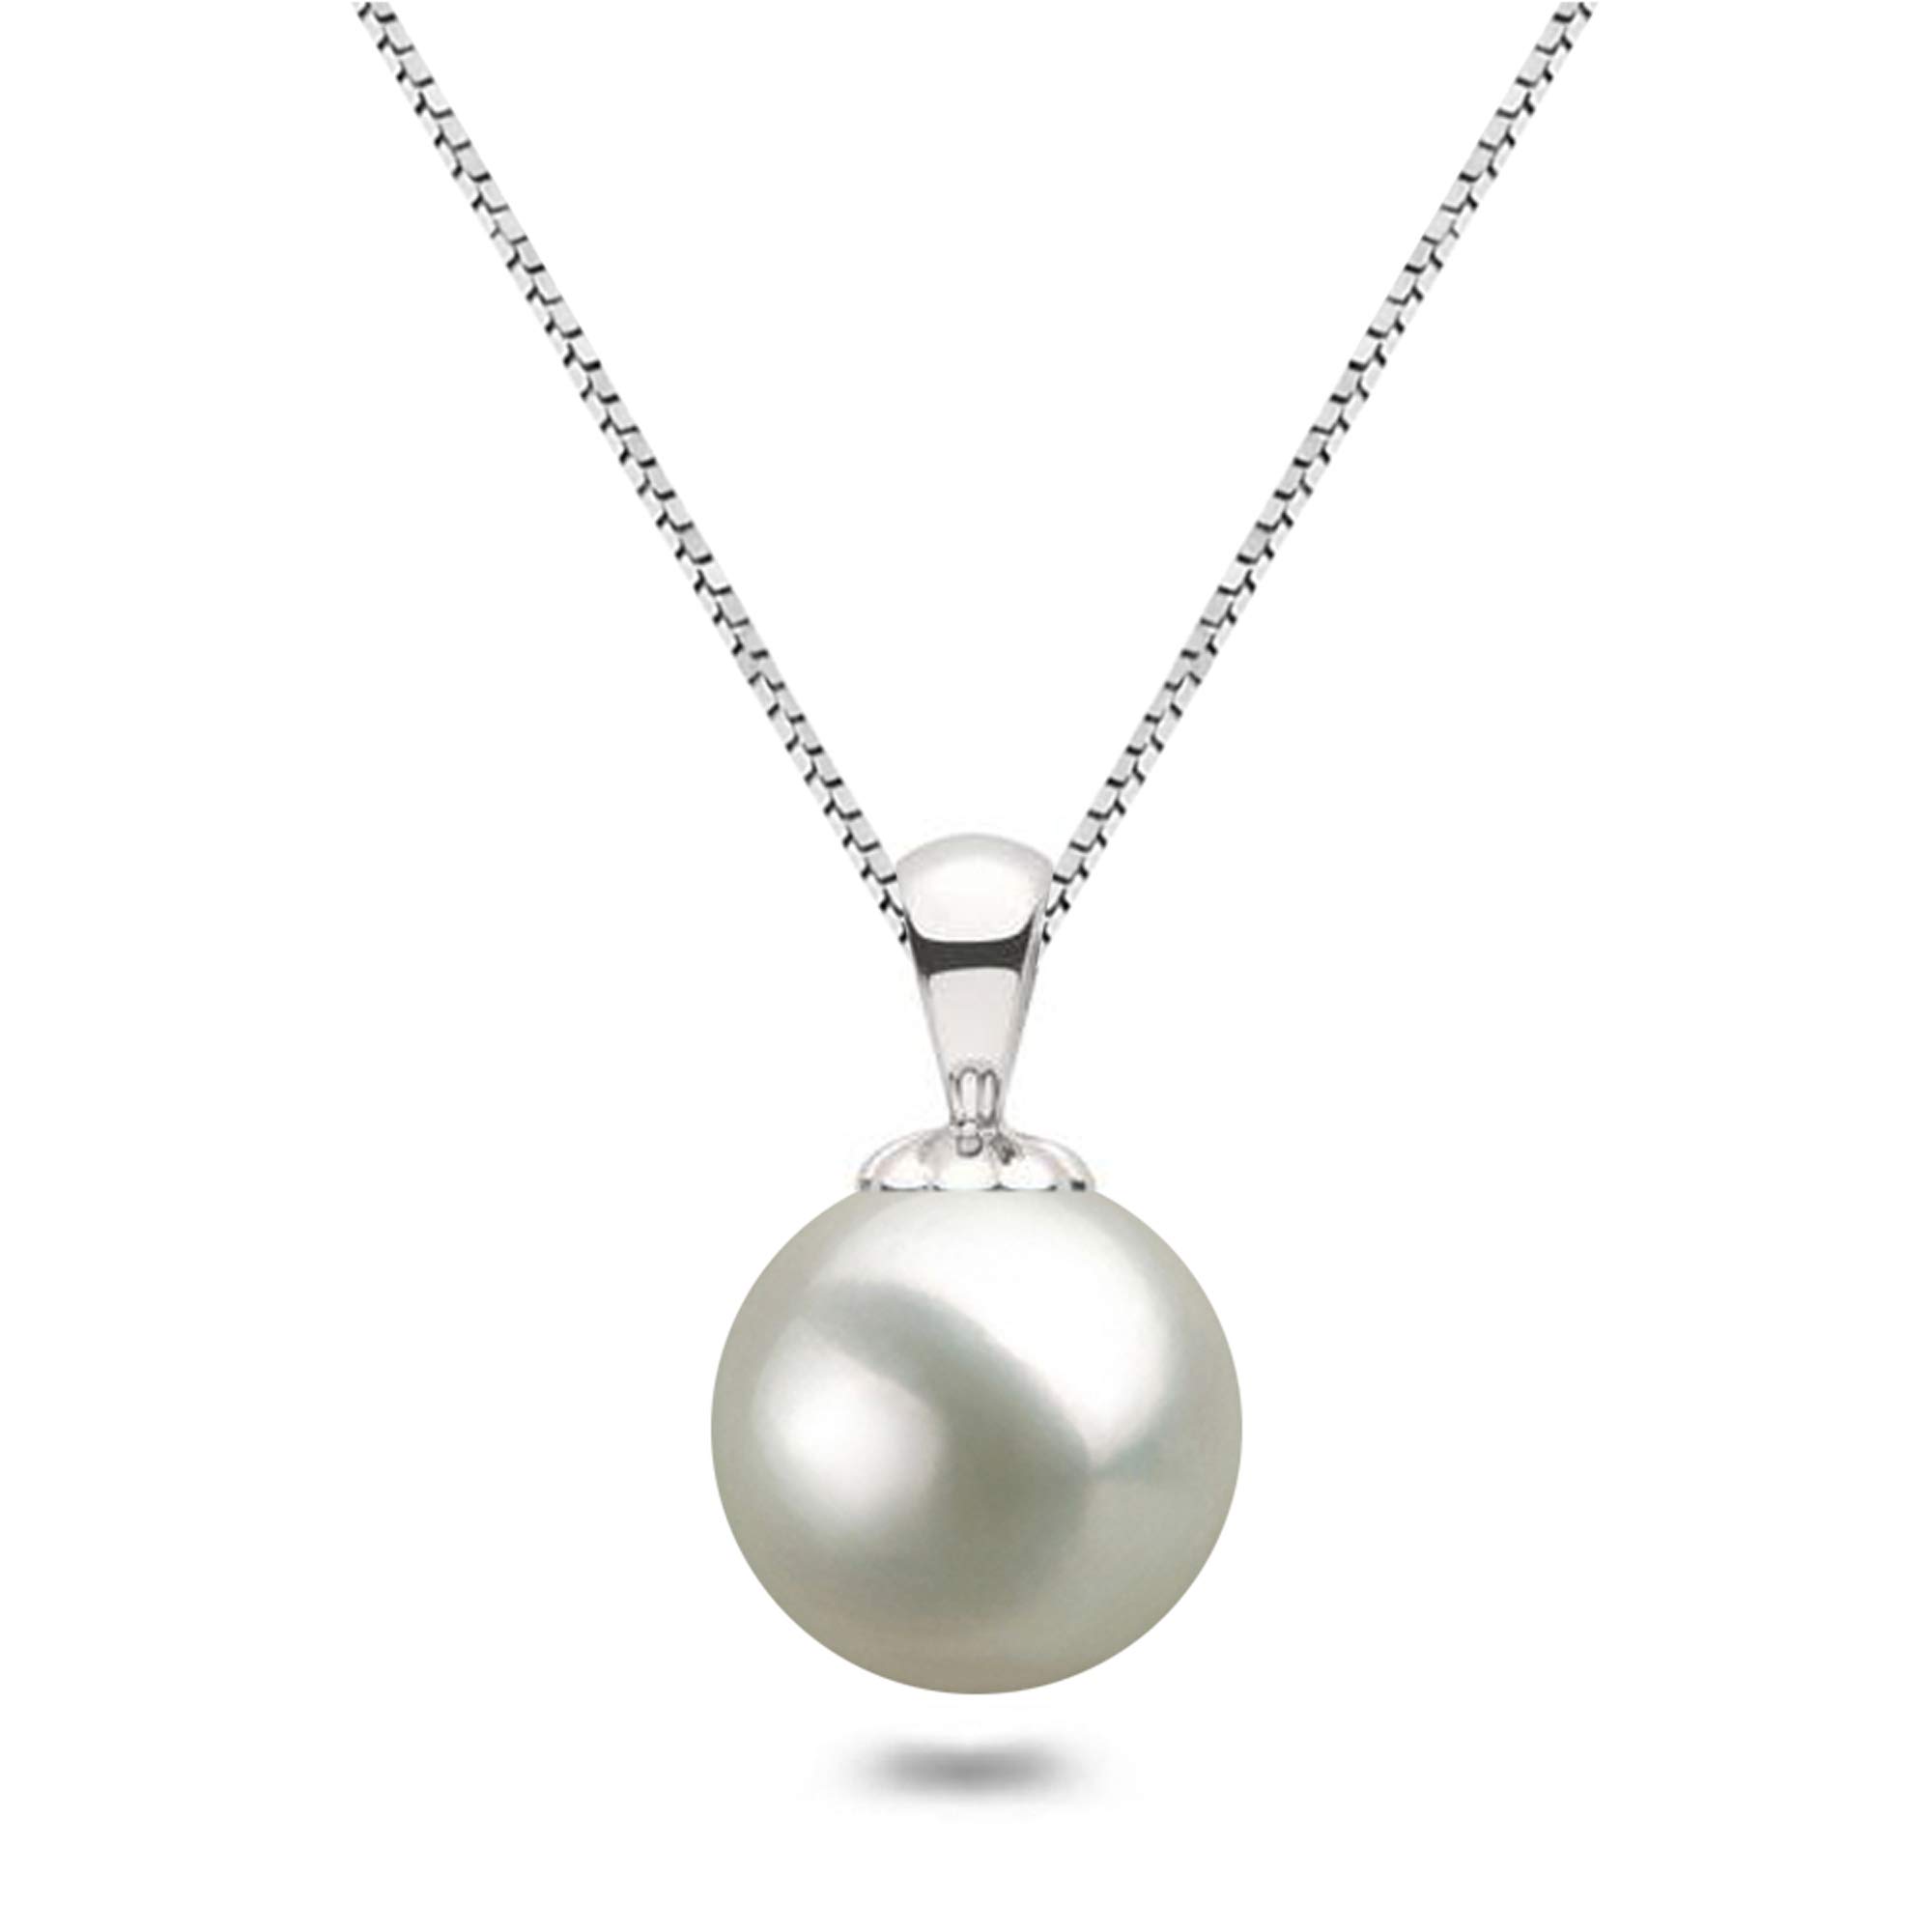 Orien Jewelry White Japanese AAAA 6-13.5mm Freshwater Cultured Pearl Pendant Necklace 16